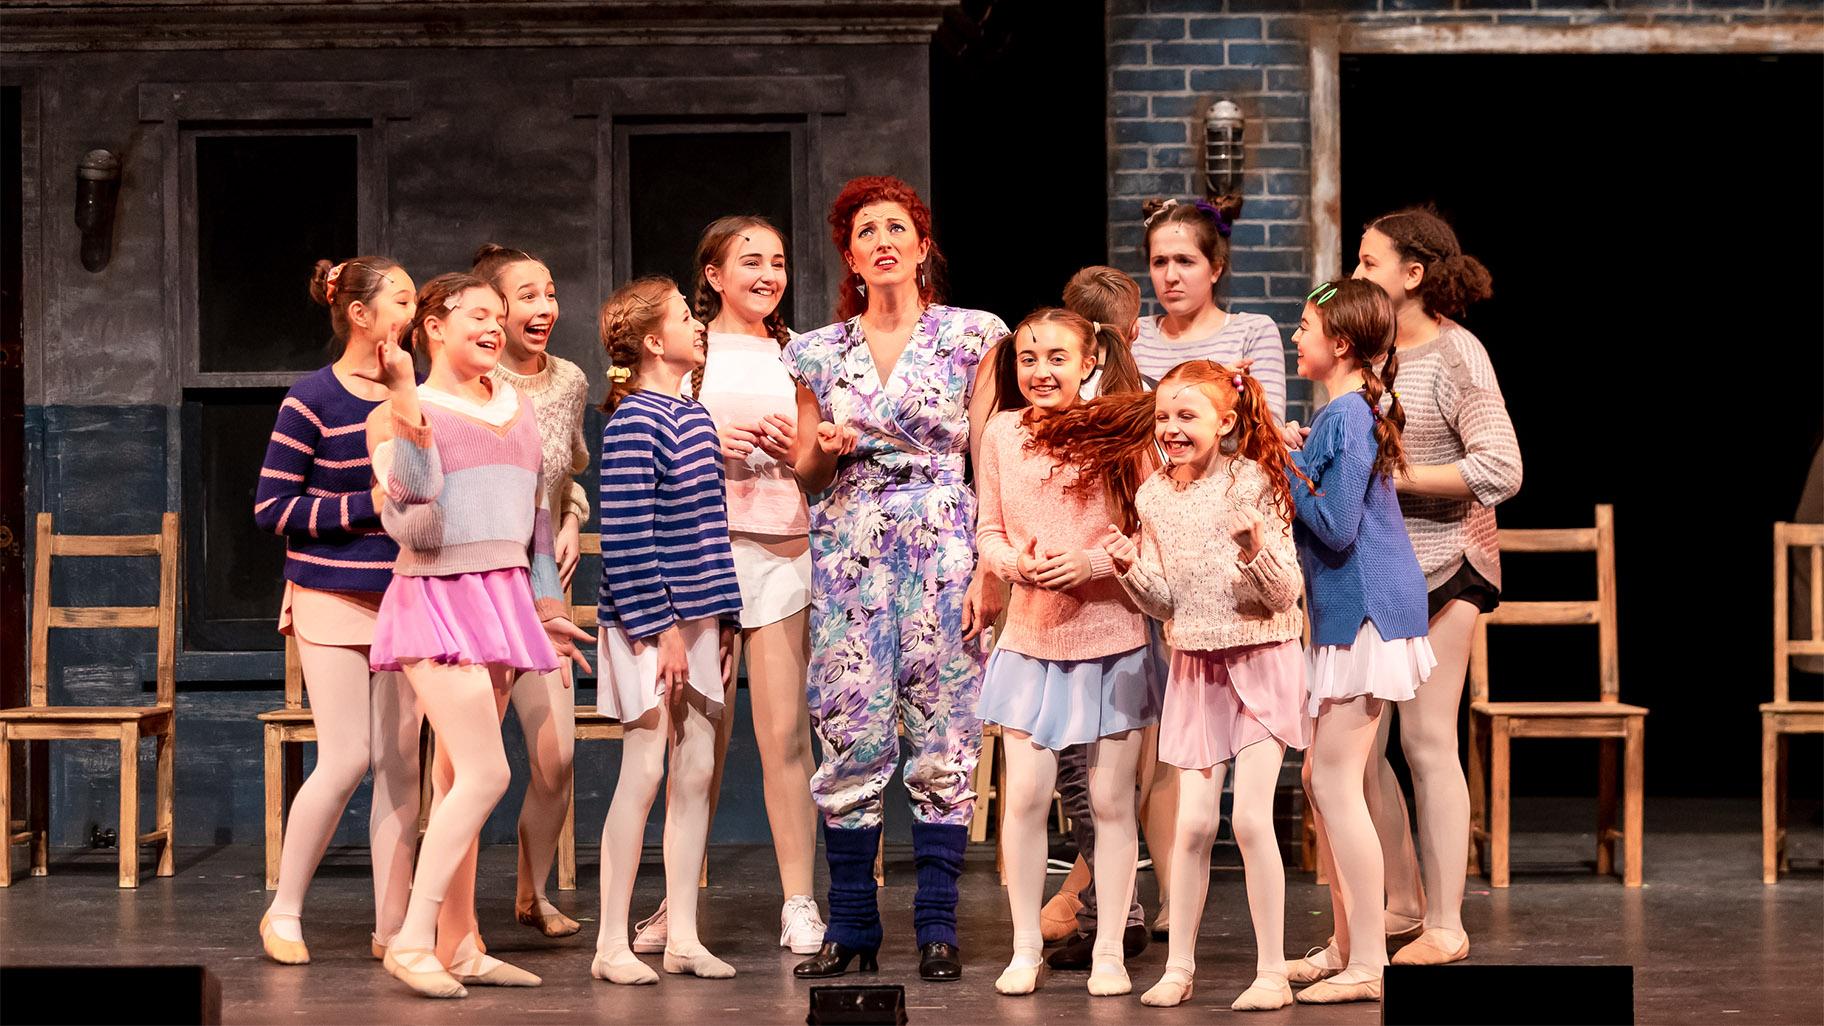 It is the bitter but insightful Mrs. Wilkerson (Casiena Raether) — a neighborhood dance teacher who never made it as a dancer herself — who notices Billy’s innate gift the moment he joins her class. The class full of giggly young girls, includes her sassy little daughter, Debbie (Everleigh Murphy, who easily lights up the stage). (Credit: Brett Beiner)